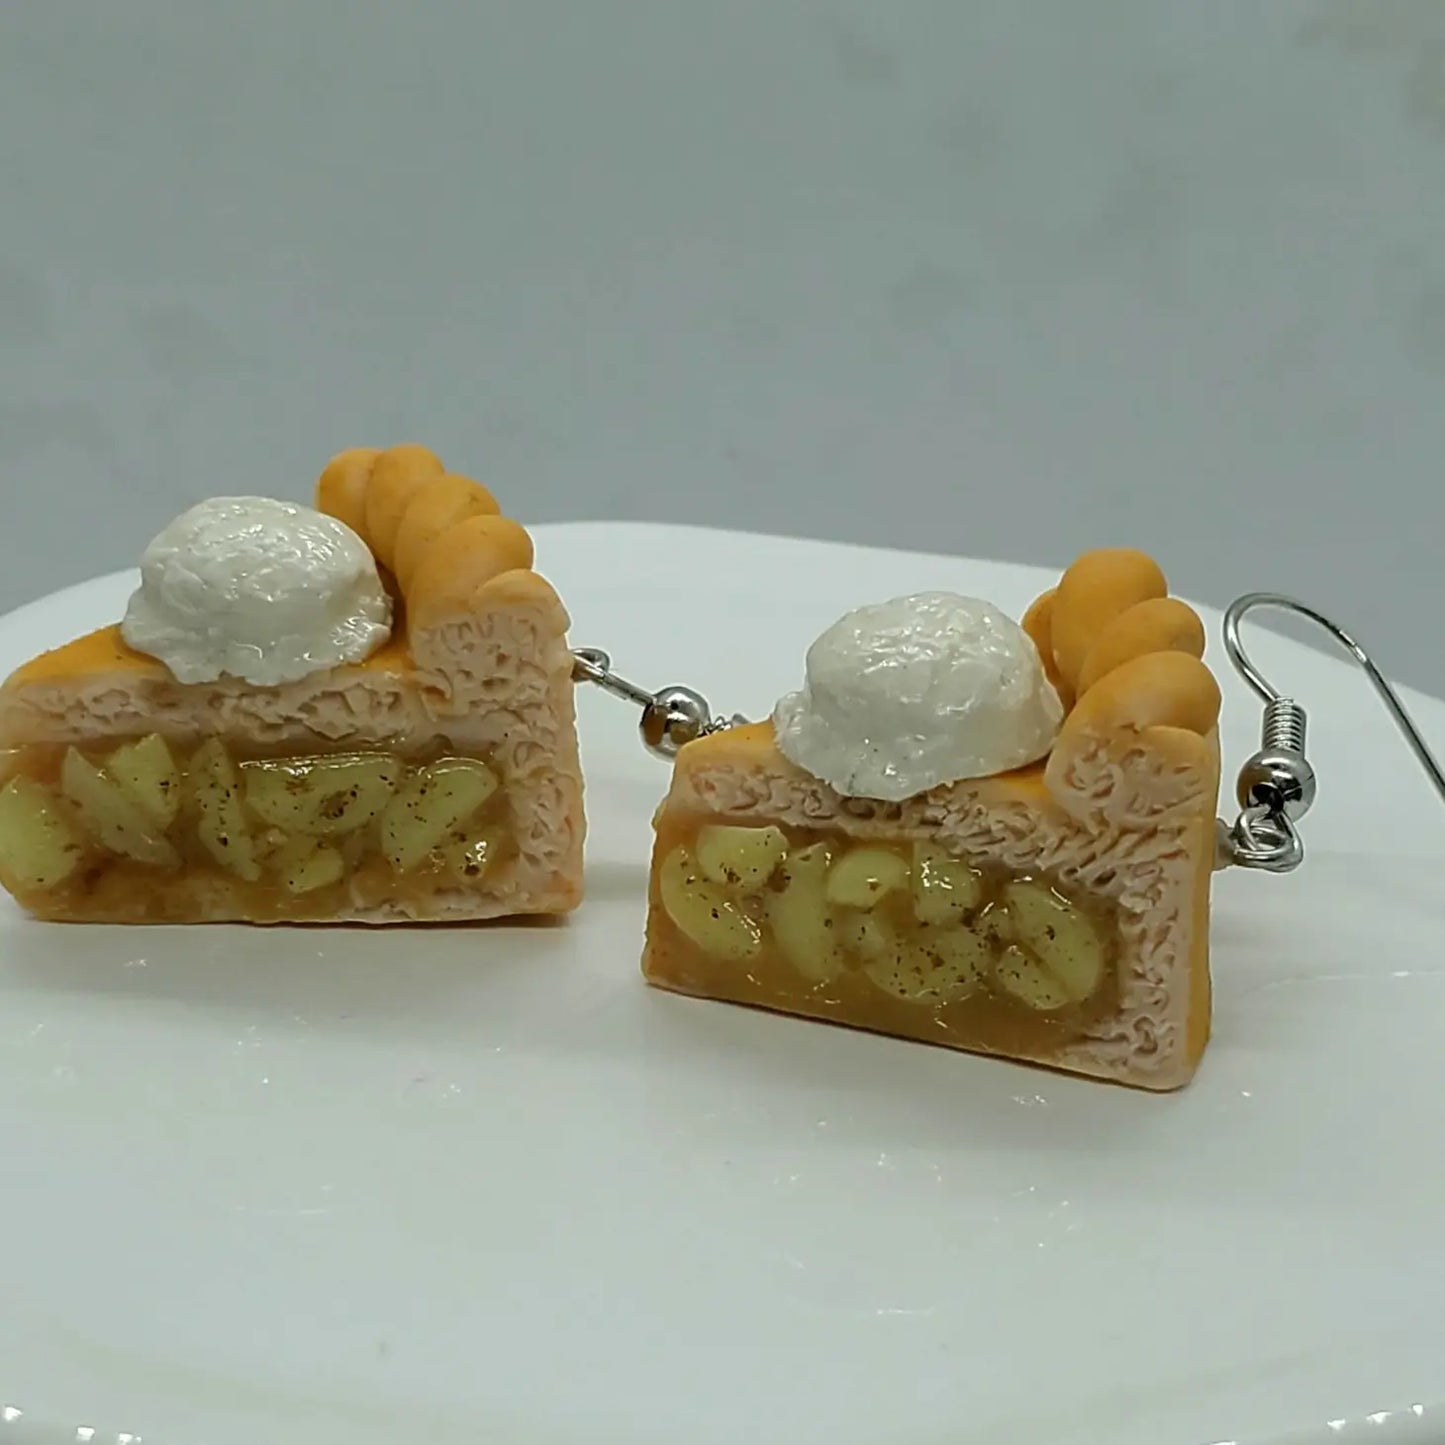 A pair of small, clay earrings in the shape of apple pie slices. You can see the "apple filling" from the side, and there is a scoop of ice cream on top. The earrings are on a set of silver earring hooks.